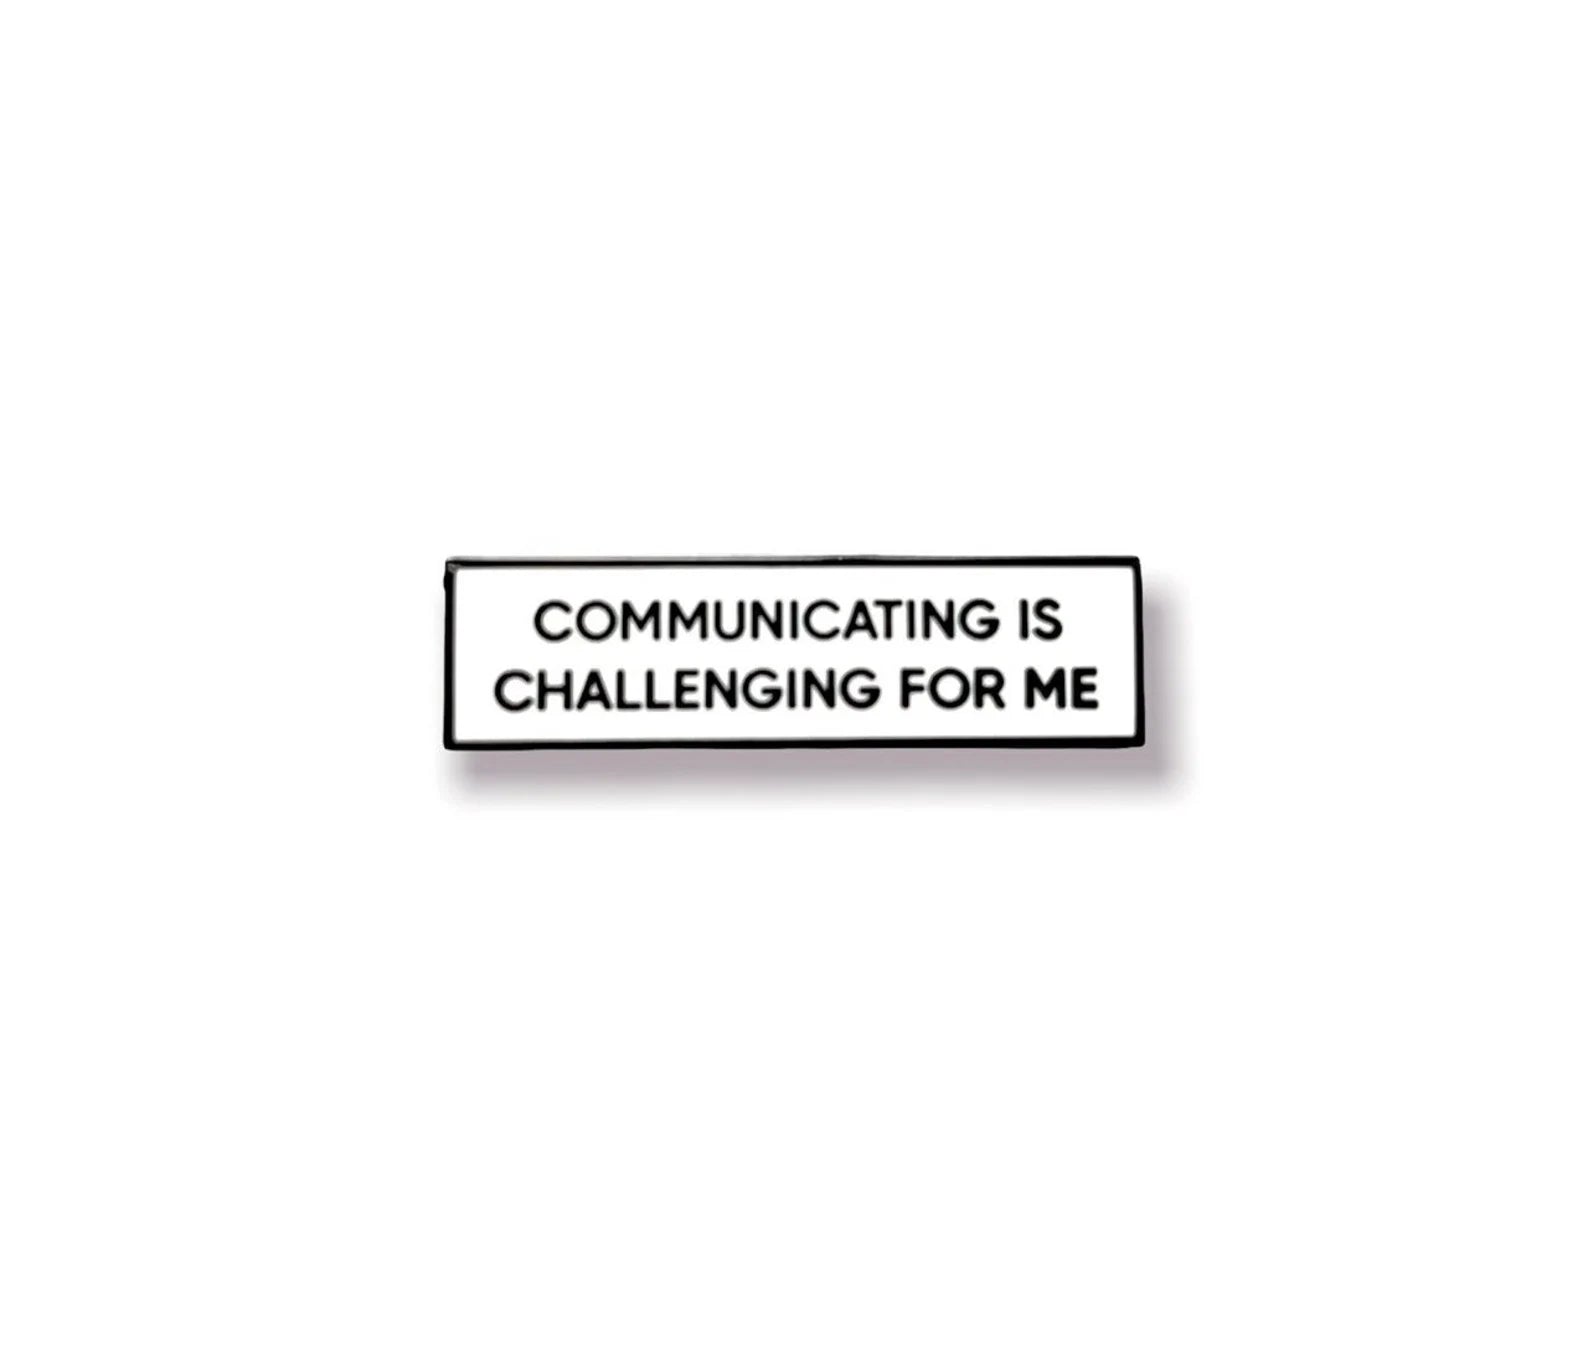 Communicating is challenging for me Disability Visibility Disclosure Pins.